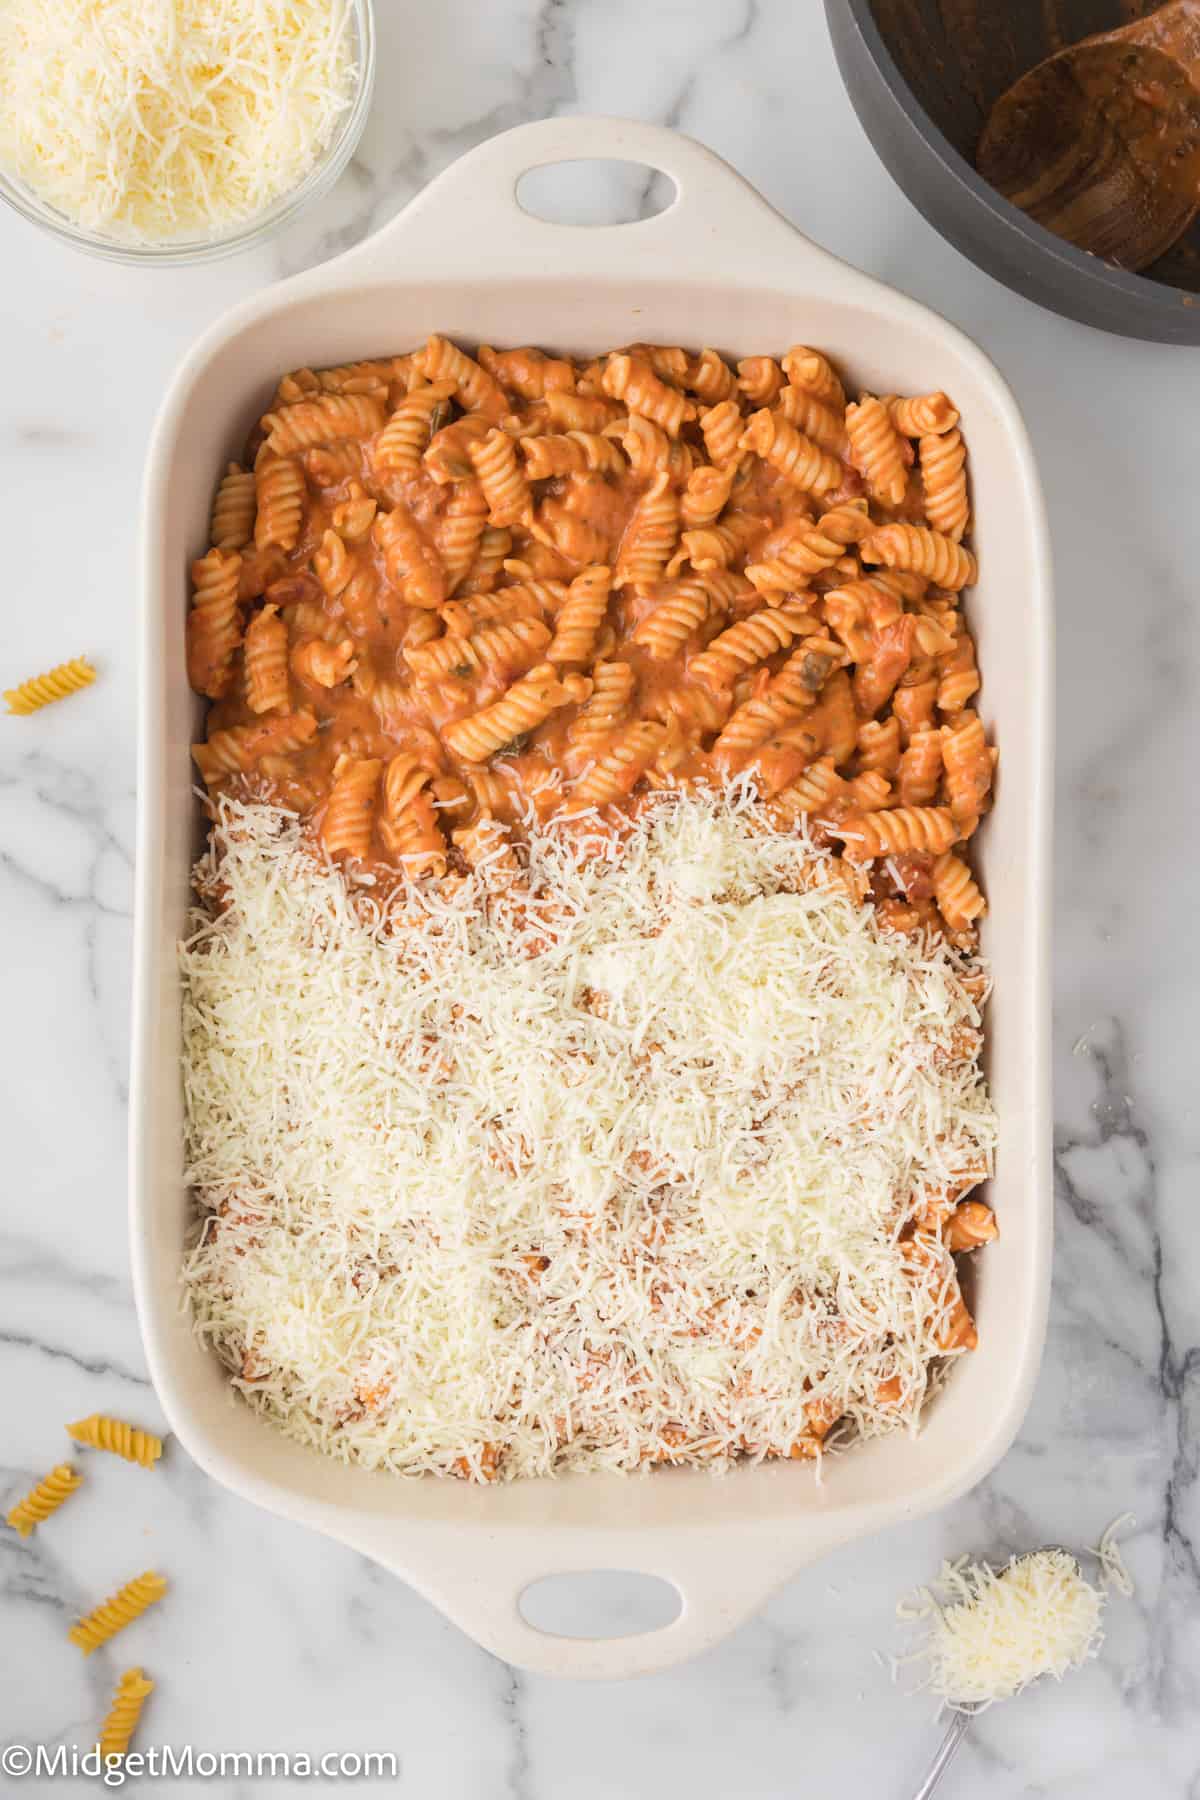 Baked pasta dish topped with shredded mozzarella cheese in a white ceramic baking dish.